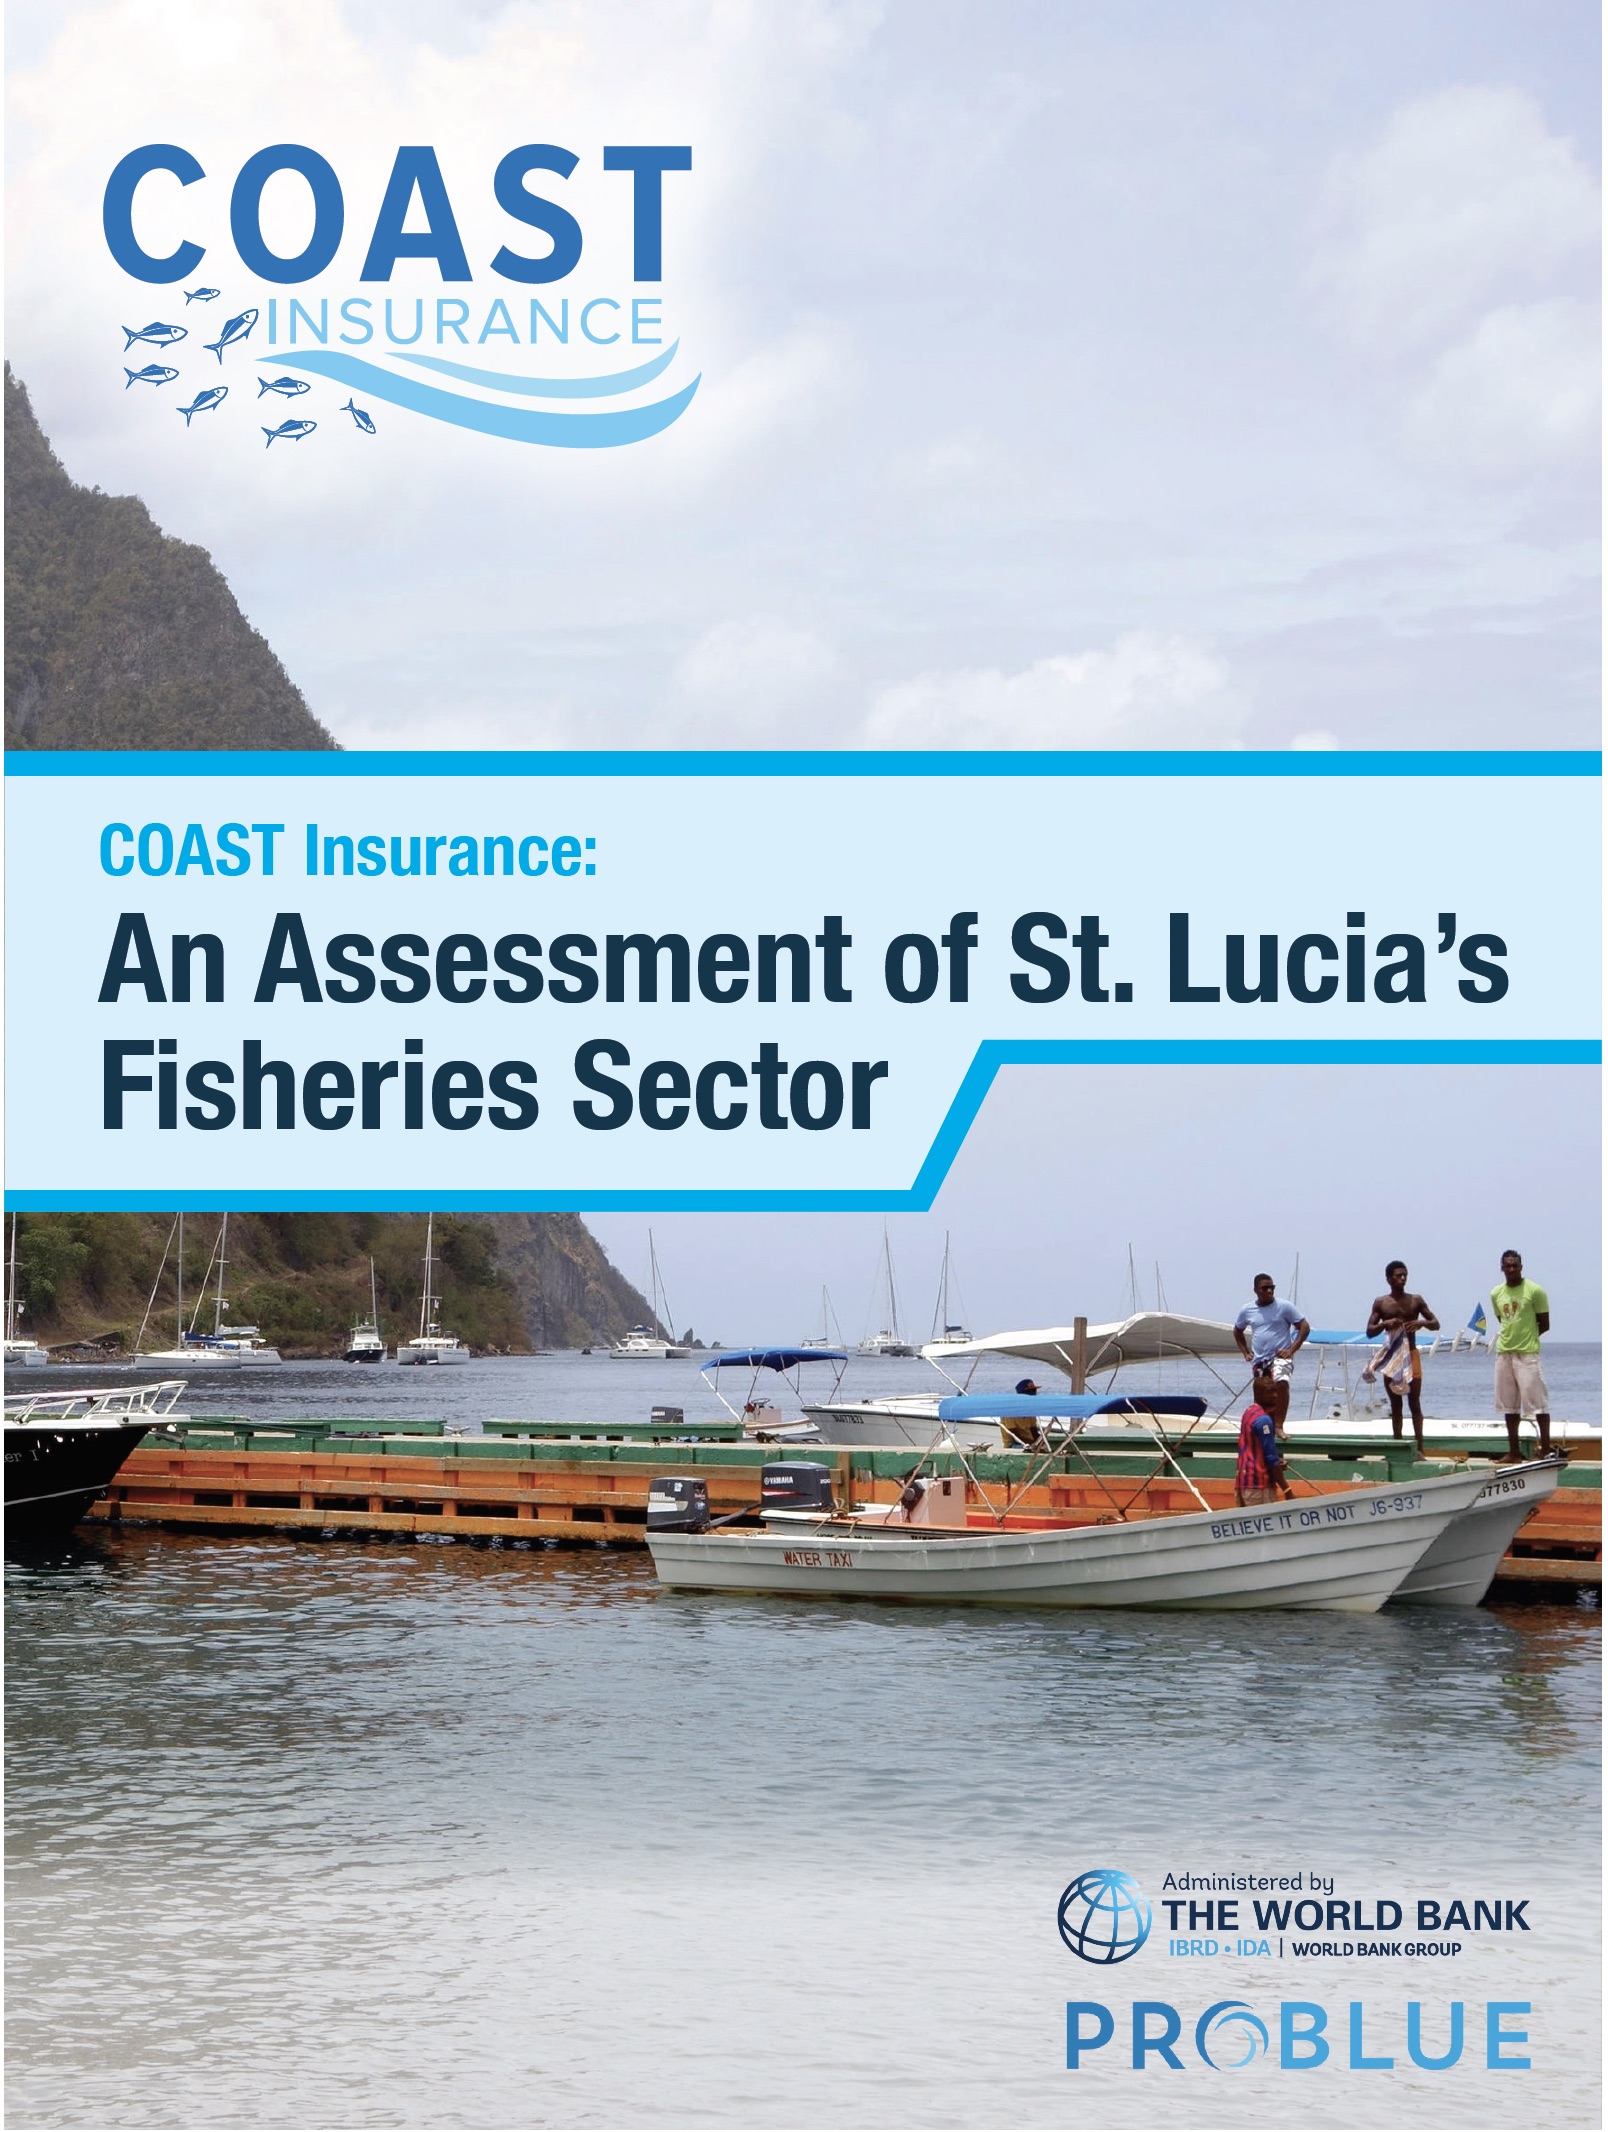 COAST Insurance: An Assessment of St. Lucia's Fisheries Sector